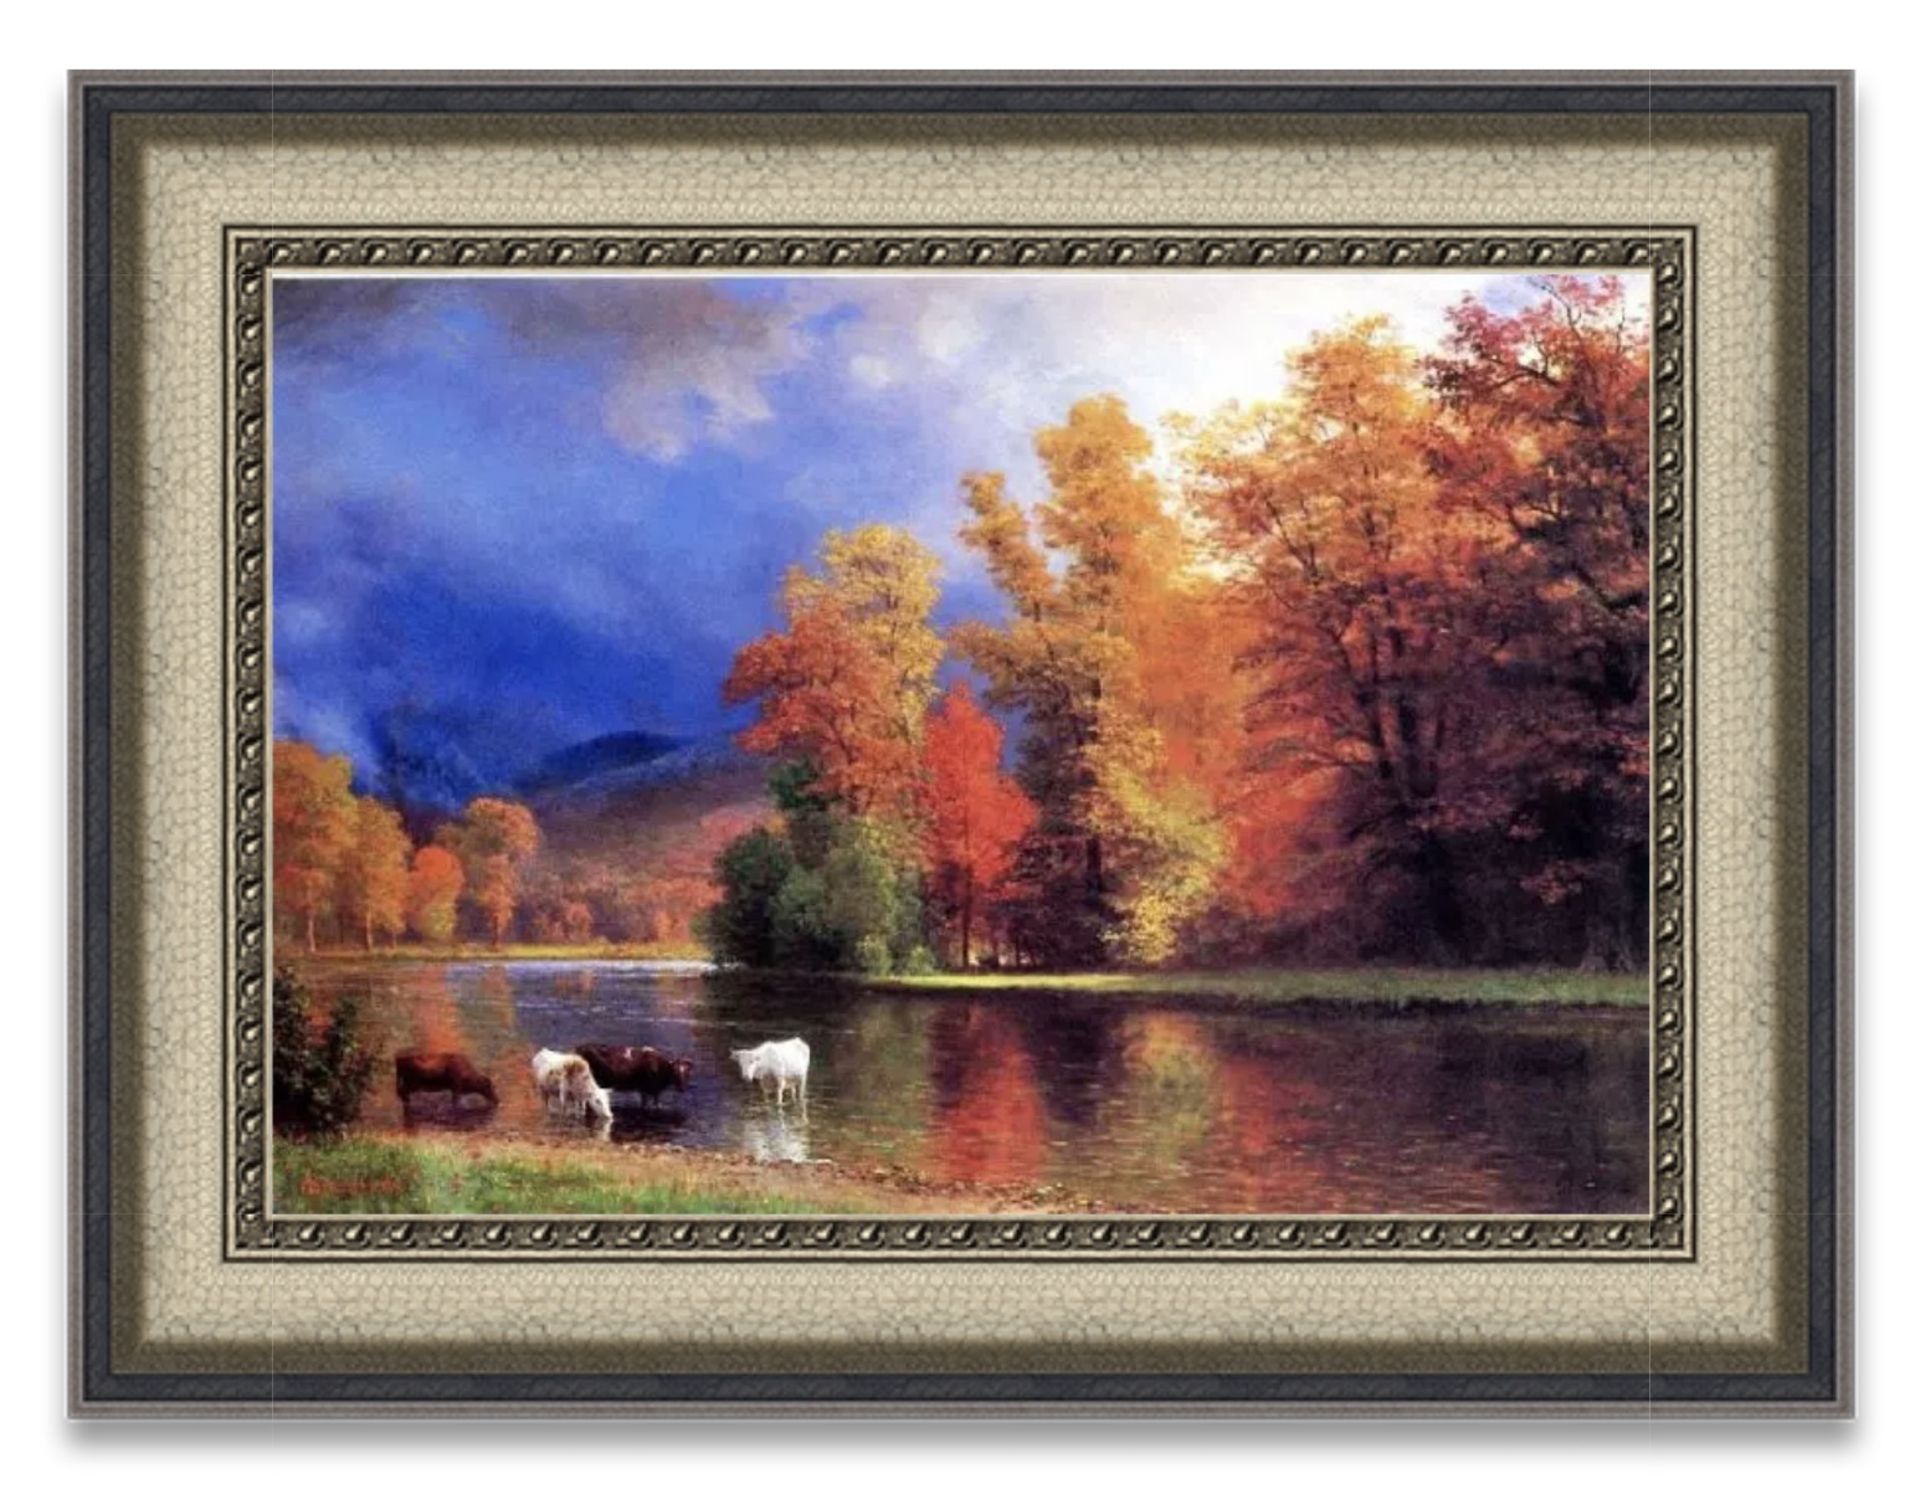 Albert Bierstadt "On the Saco" Oil Painting, After